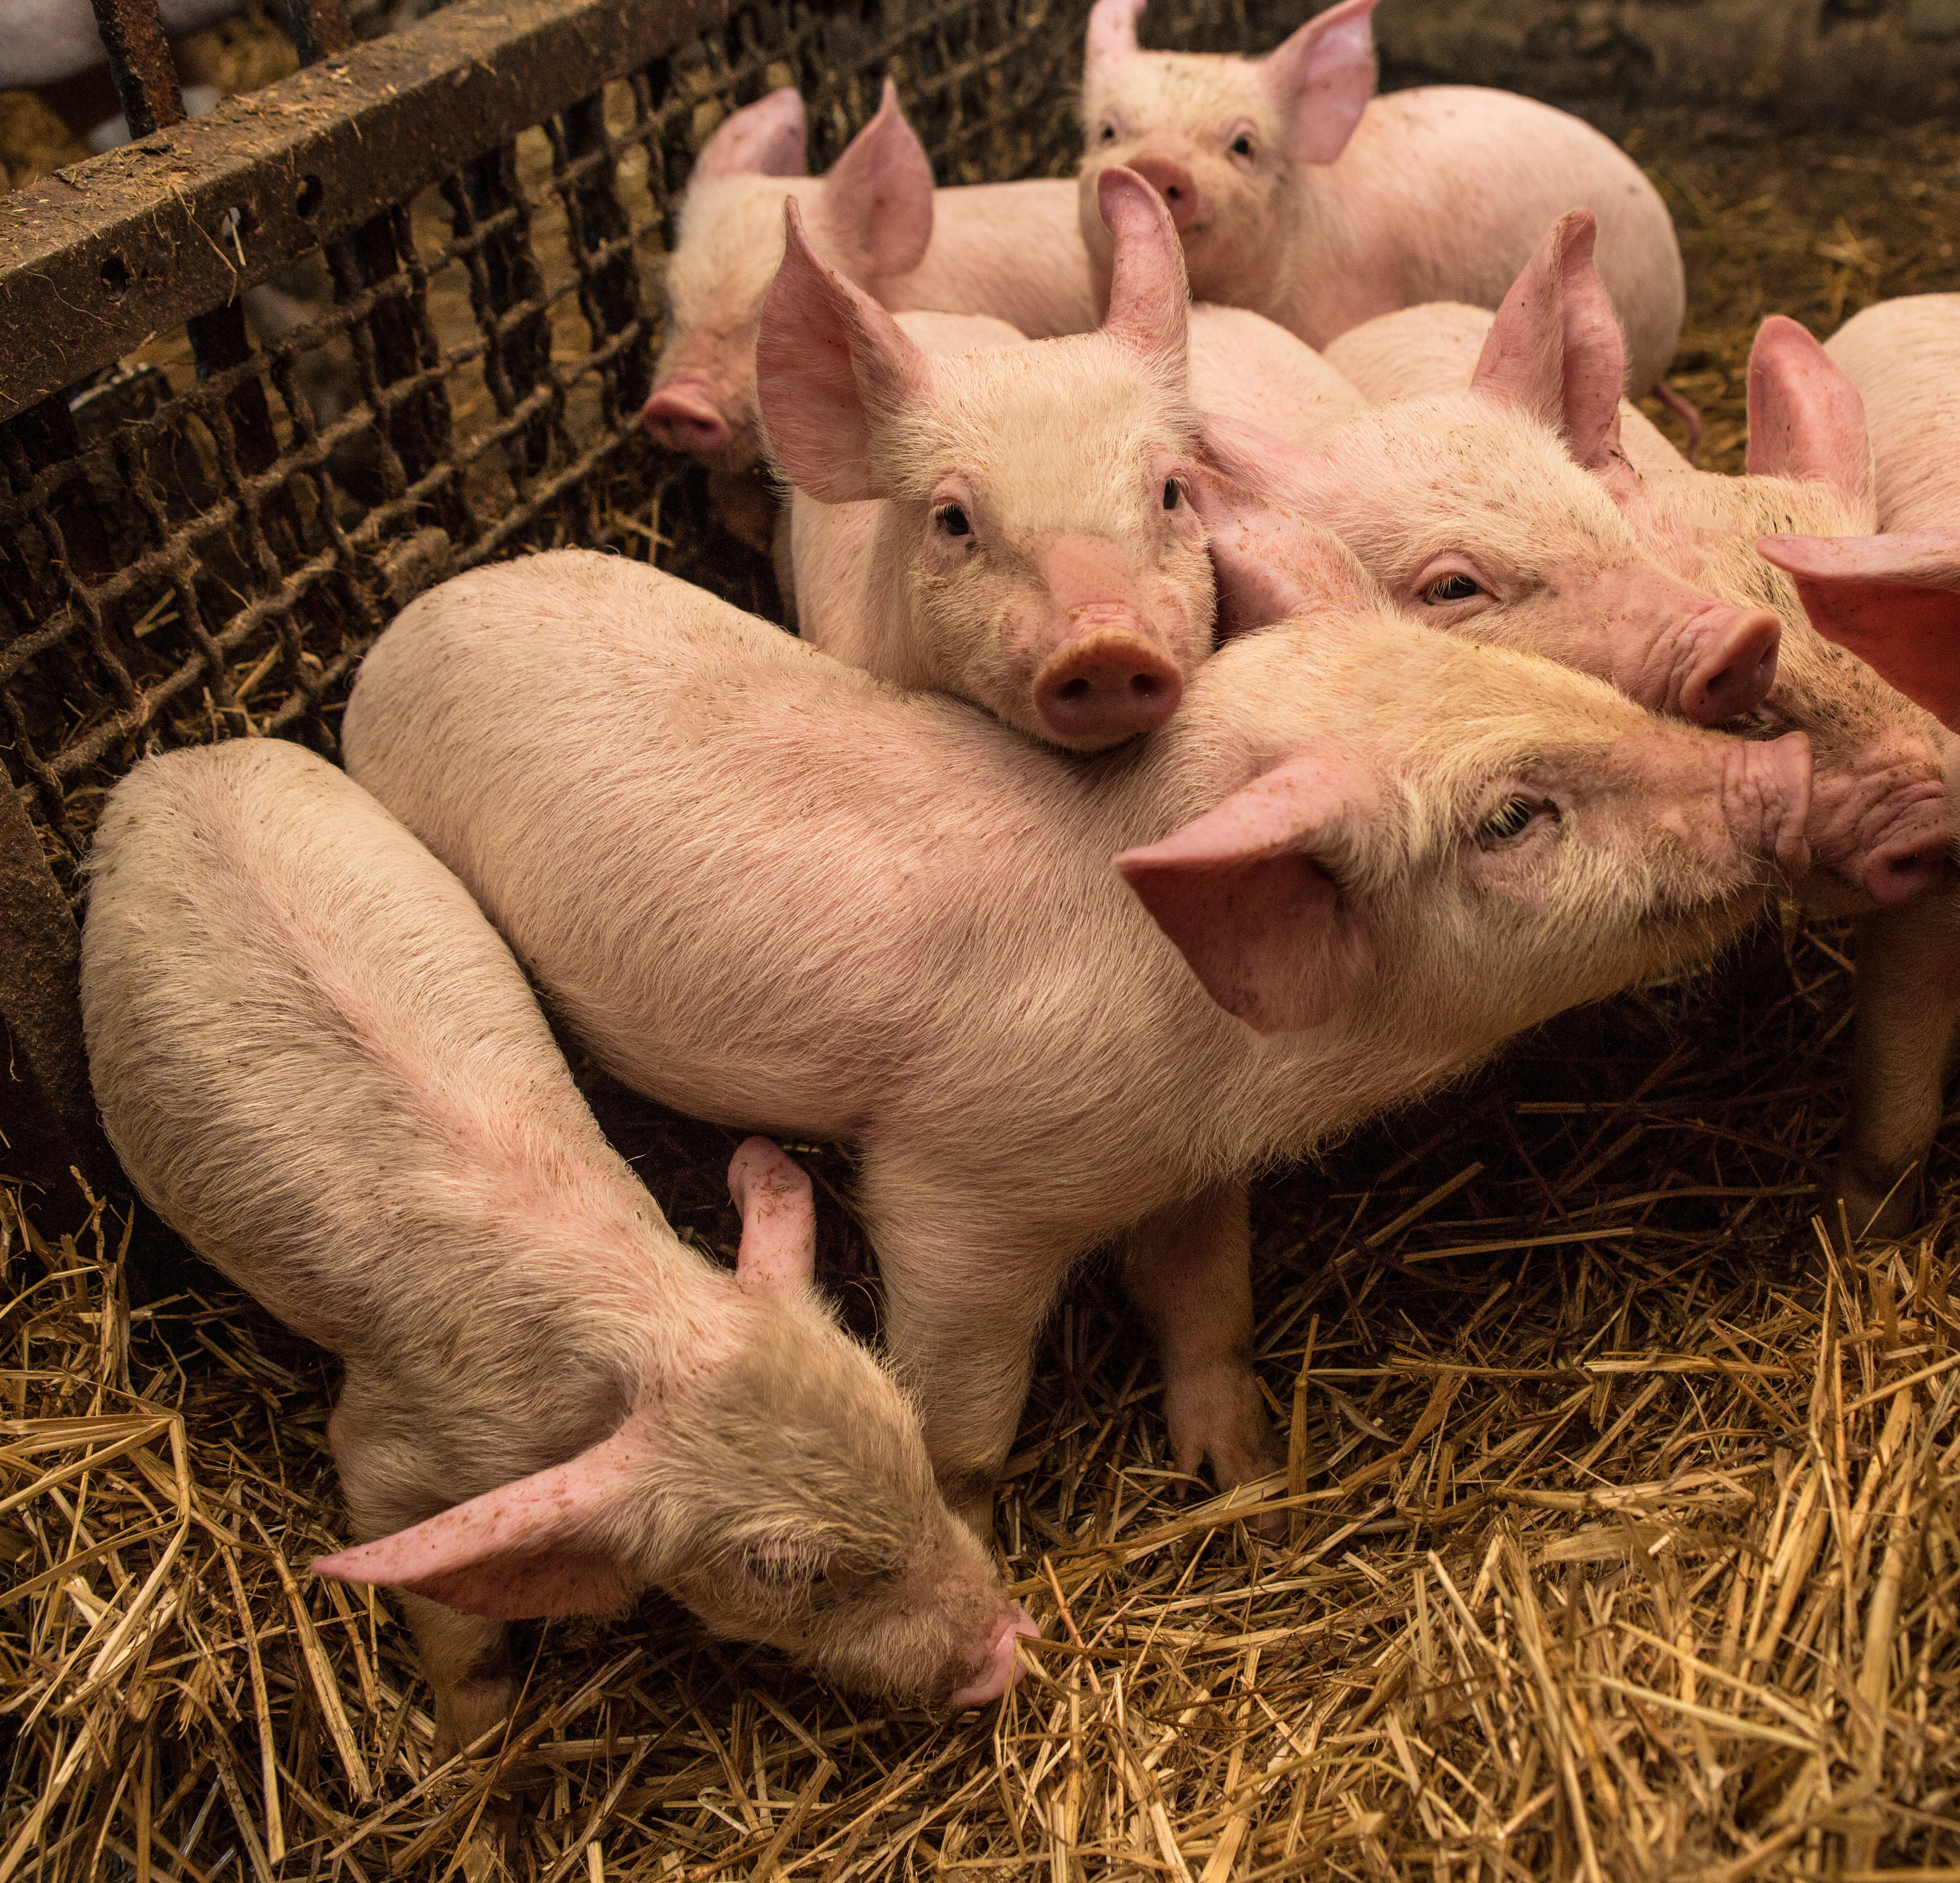 A group of piglets standing in straw